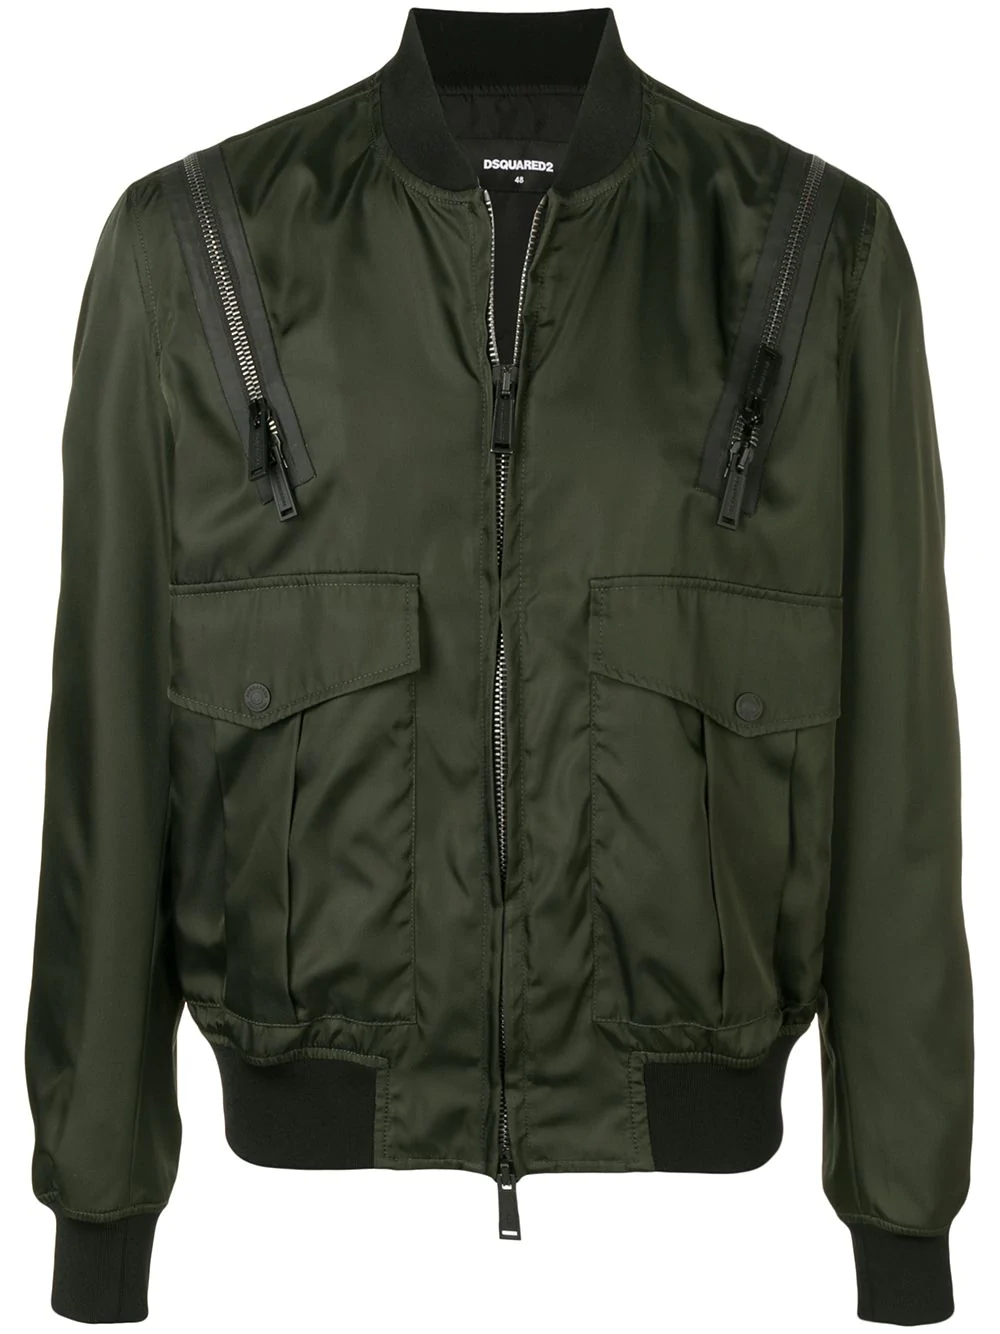 Dsquared2 Zipped Up Bomber Jacket - Green In 697 Green Army | ModeSens